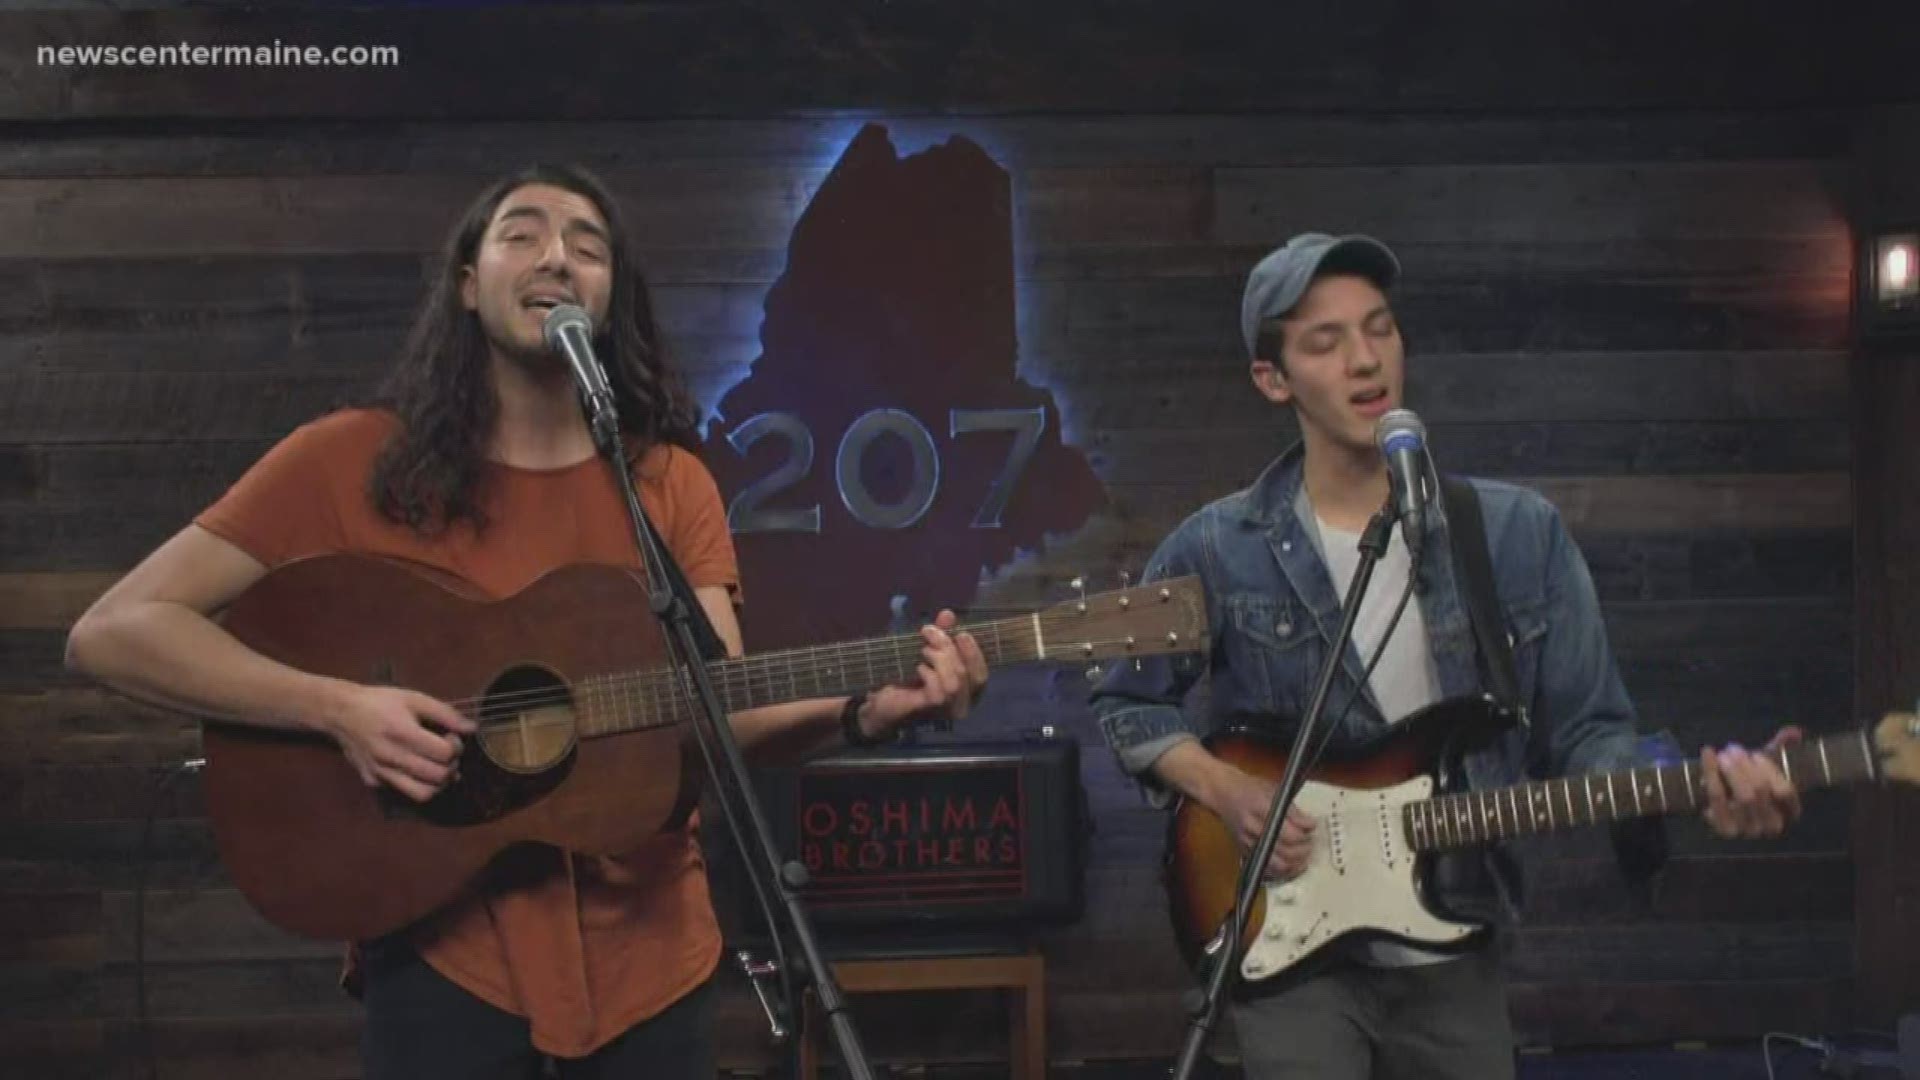 Maine band Oshima Brothers perform a new single in the 207 studio.